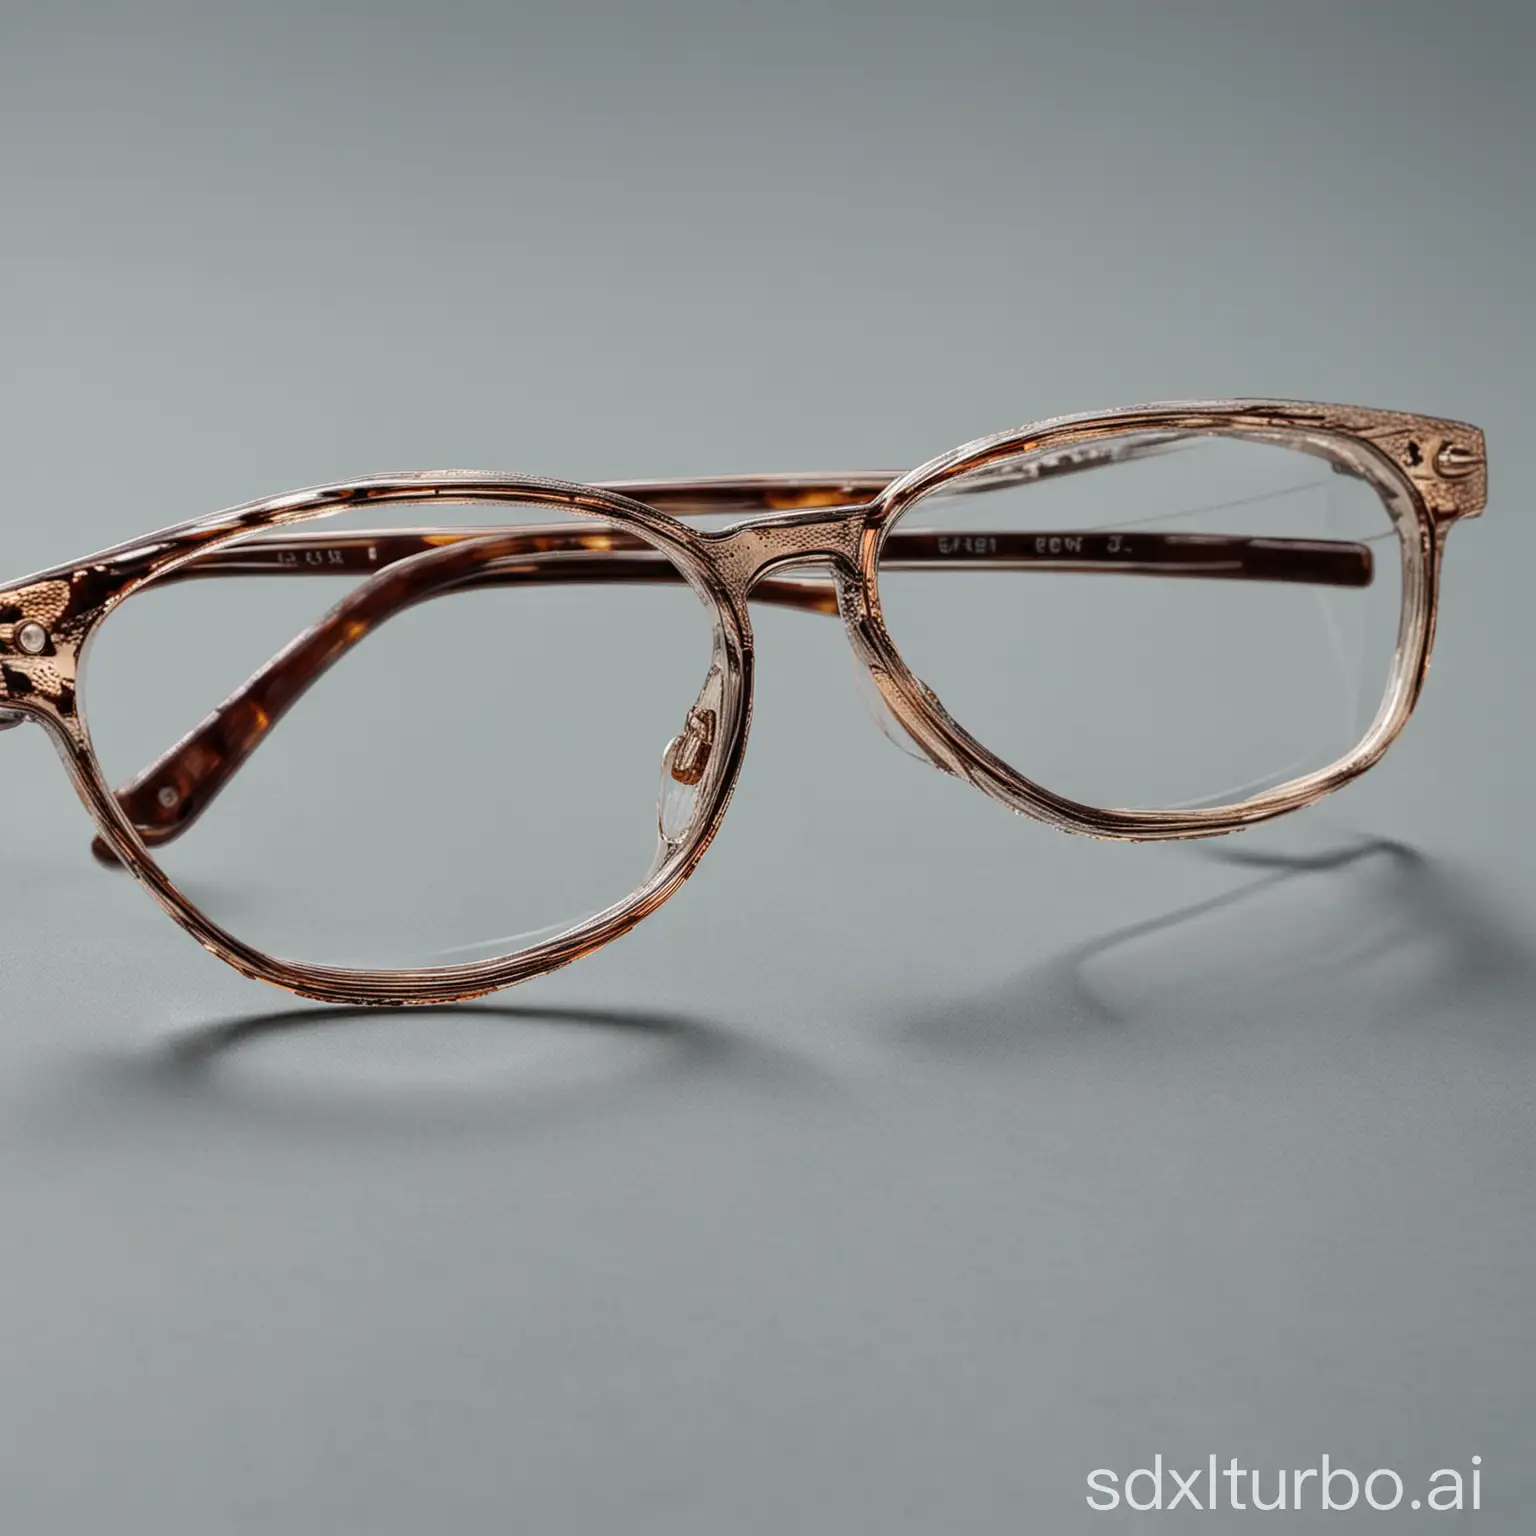 A close-up of a pair of stylish eyeglasses or sunglasses. The eyeglasses or sunglasses are made of a shiny, high-quality metal and have a classic design with a thin frame. The lenses are a clear, non-reflective glass.